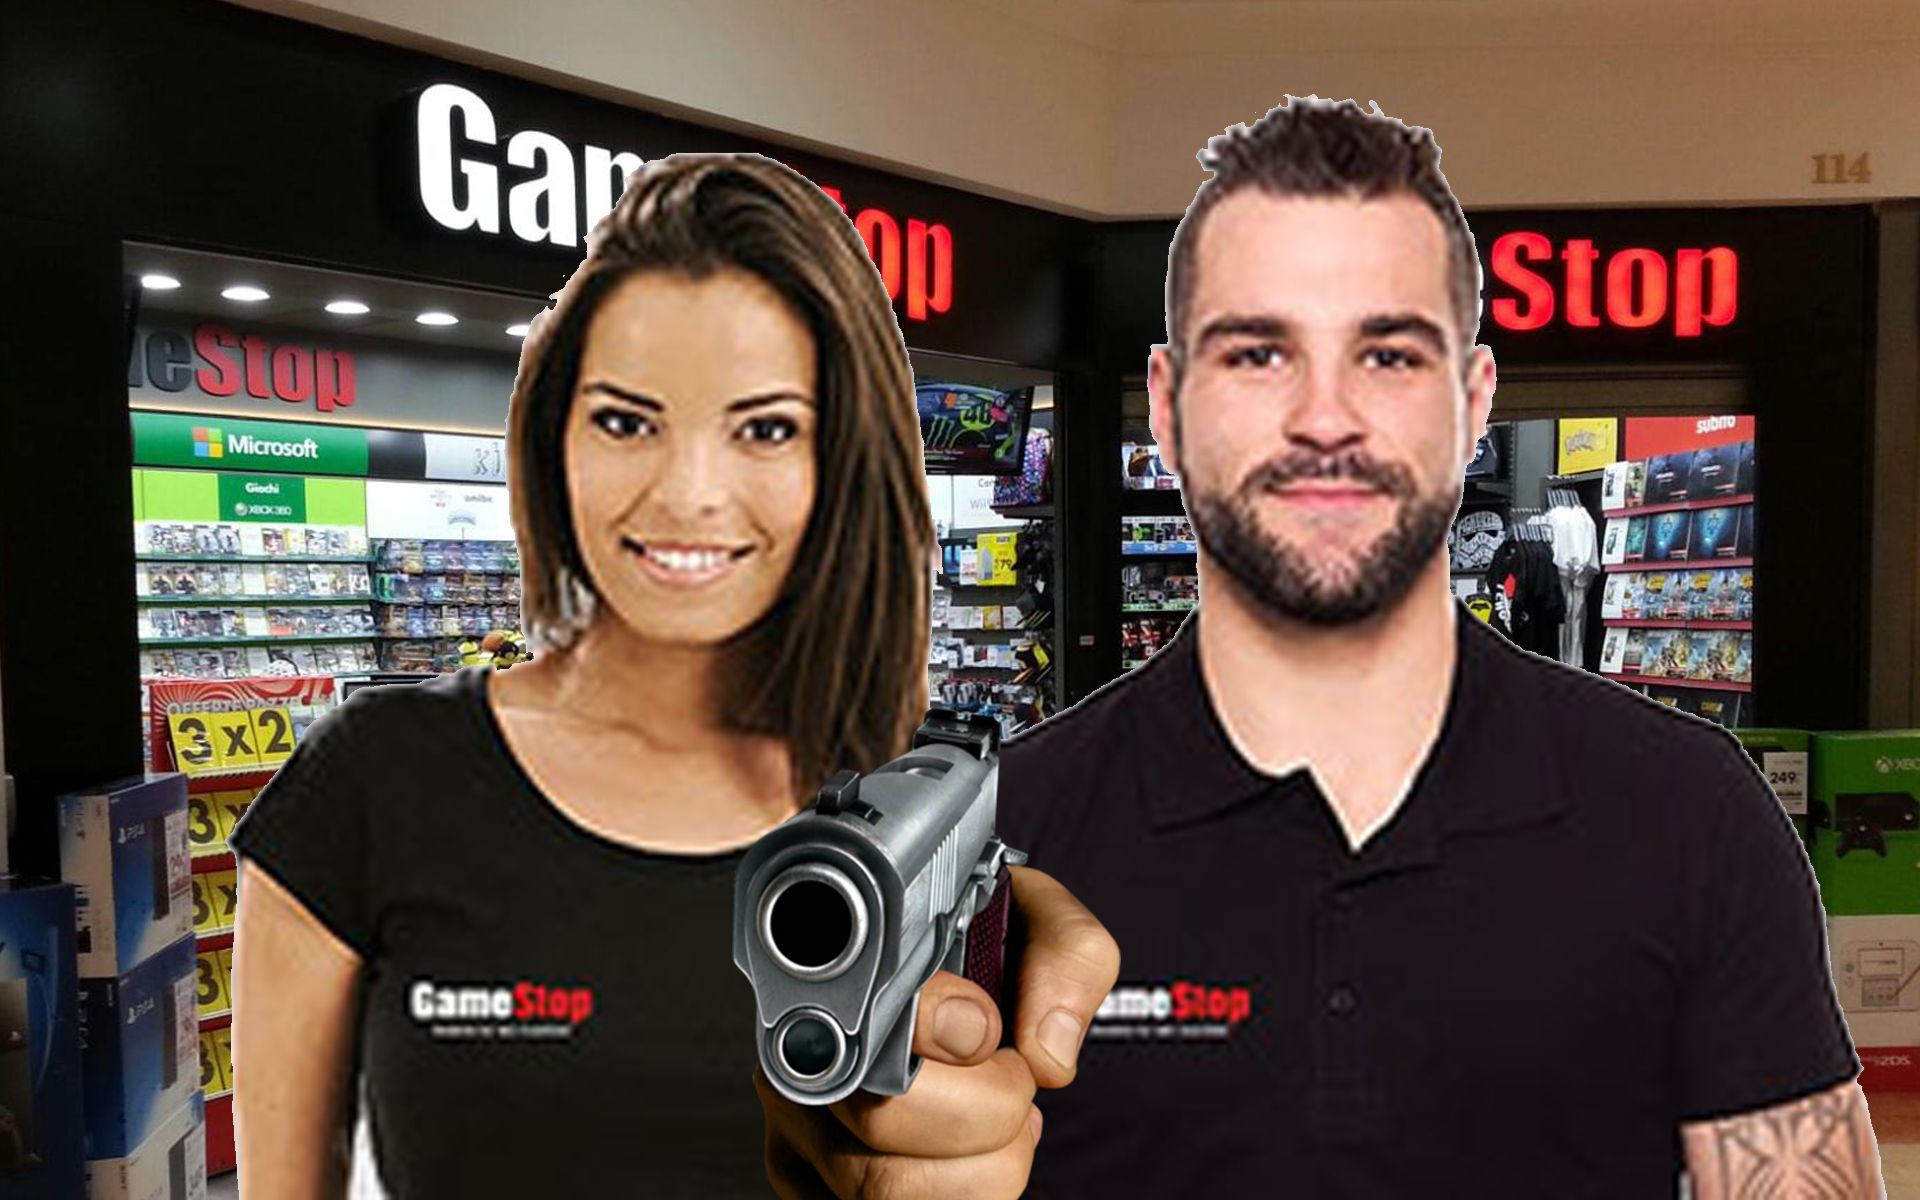 GameStop Offers New Service Where They Come To Your House And Rob You Amid COVID-19 Concerns